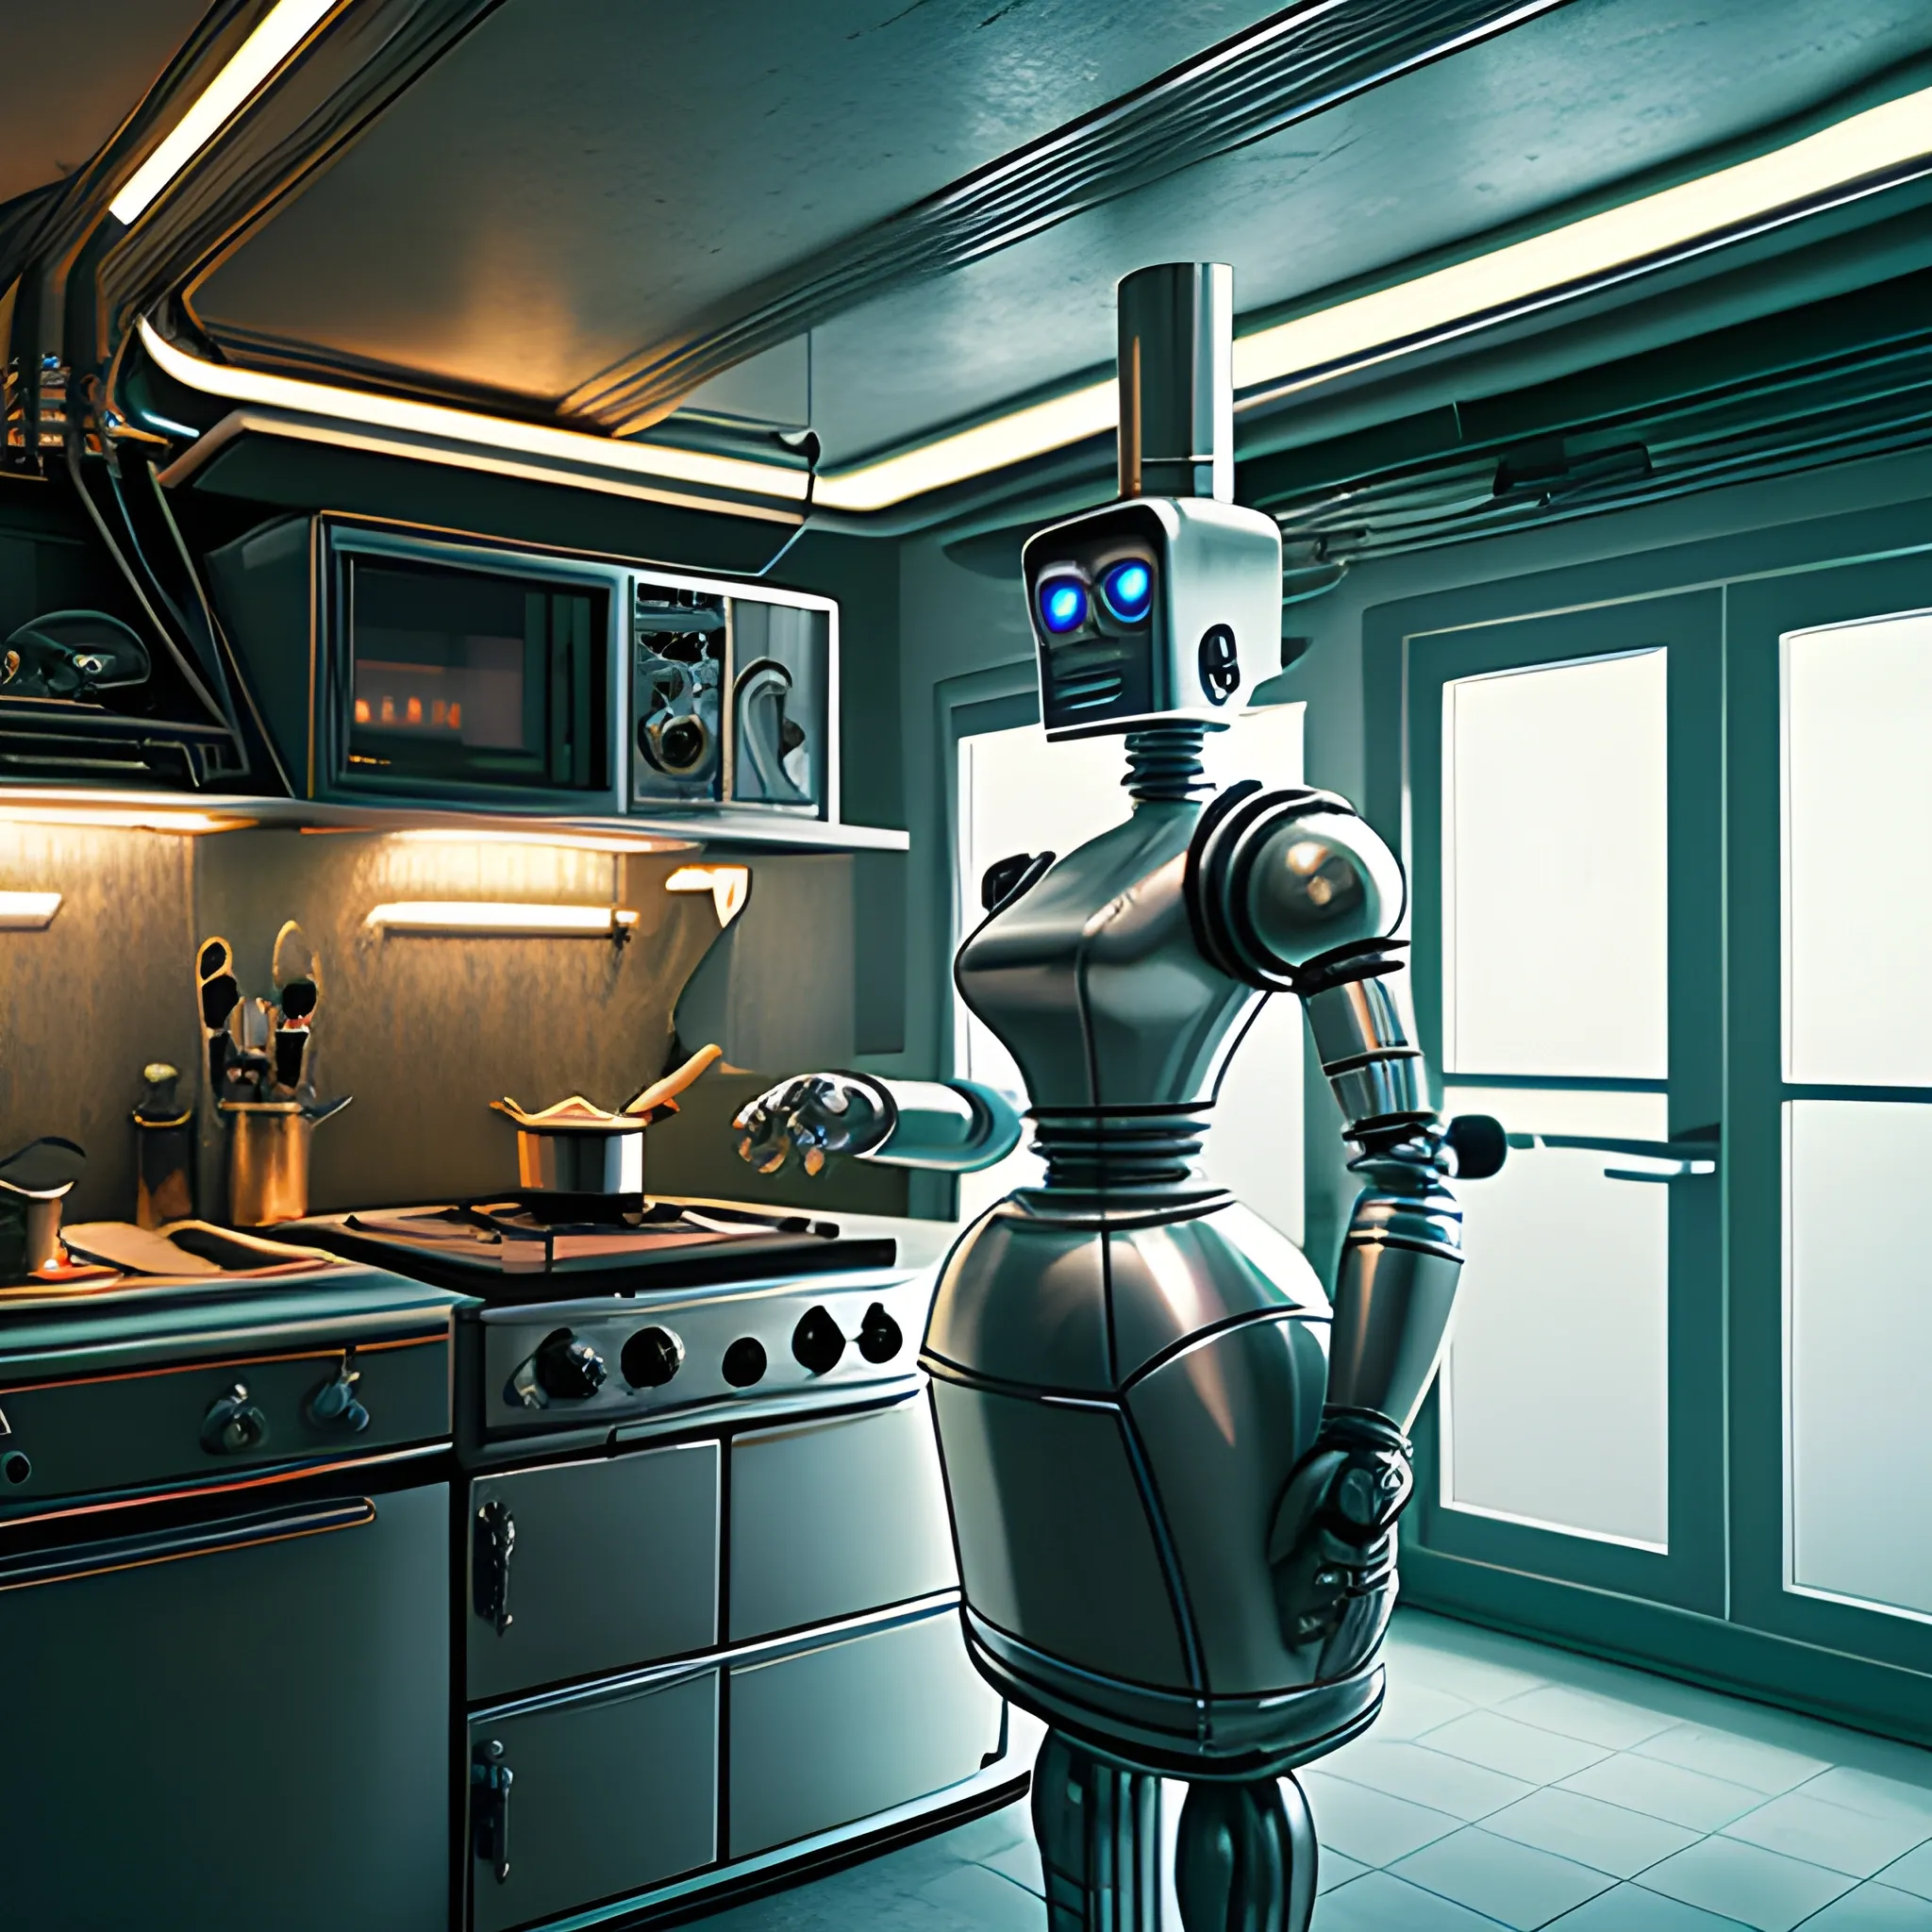 Kitchen, fancy dinner, retro futuristic, highly detailed, realistic, 4k, robot maid, 